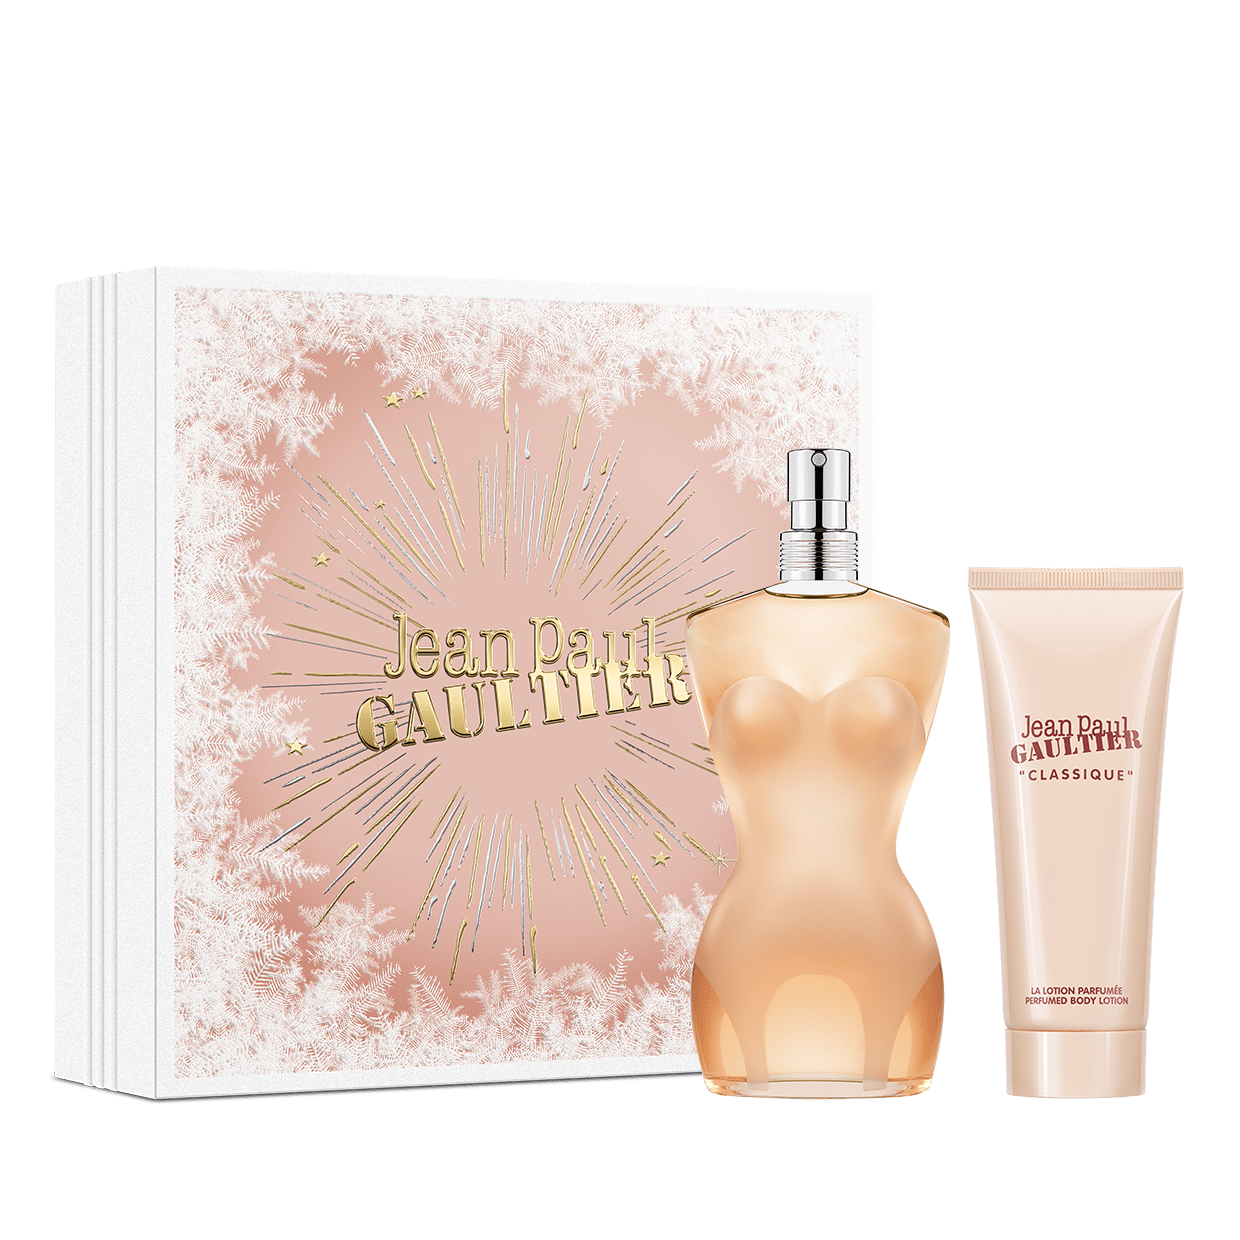 Classique 100 ml and Body lotion 75 ml